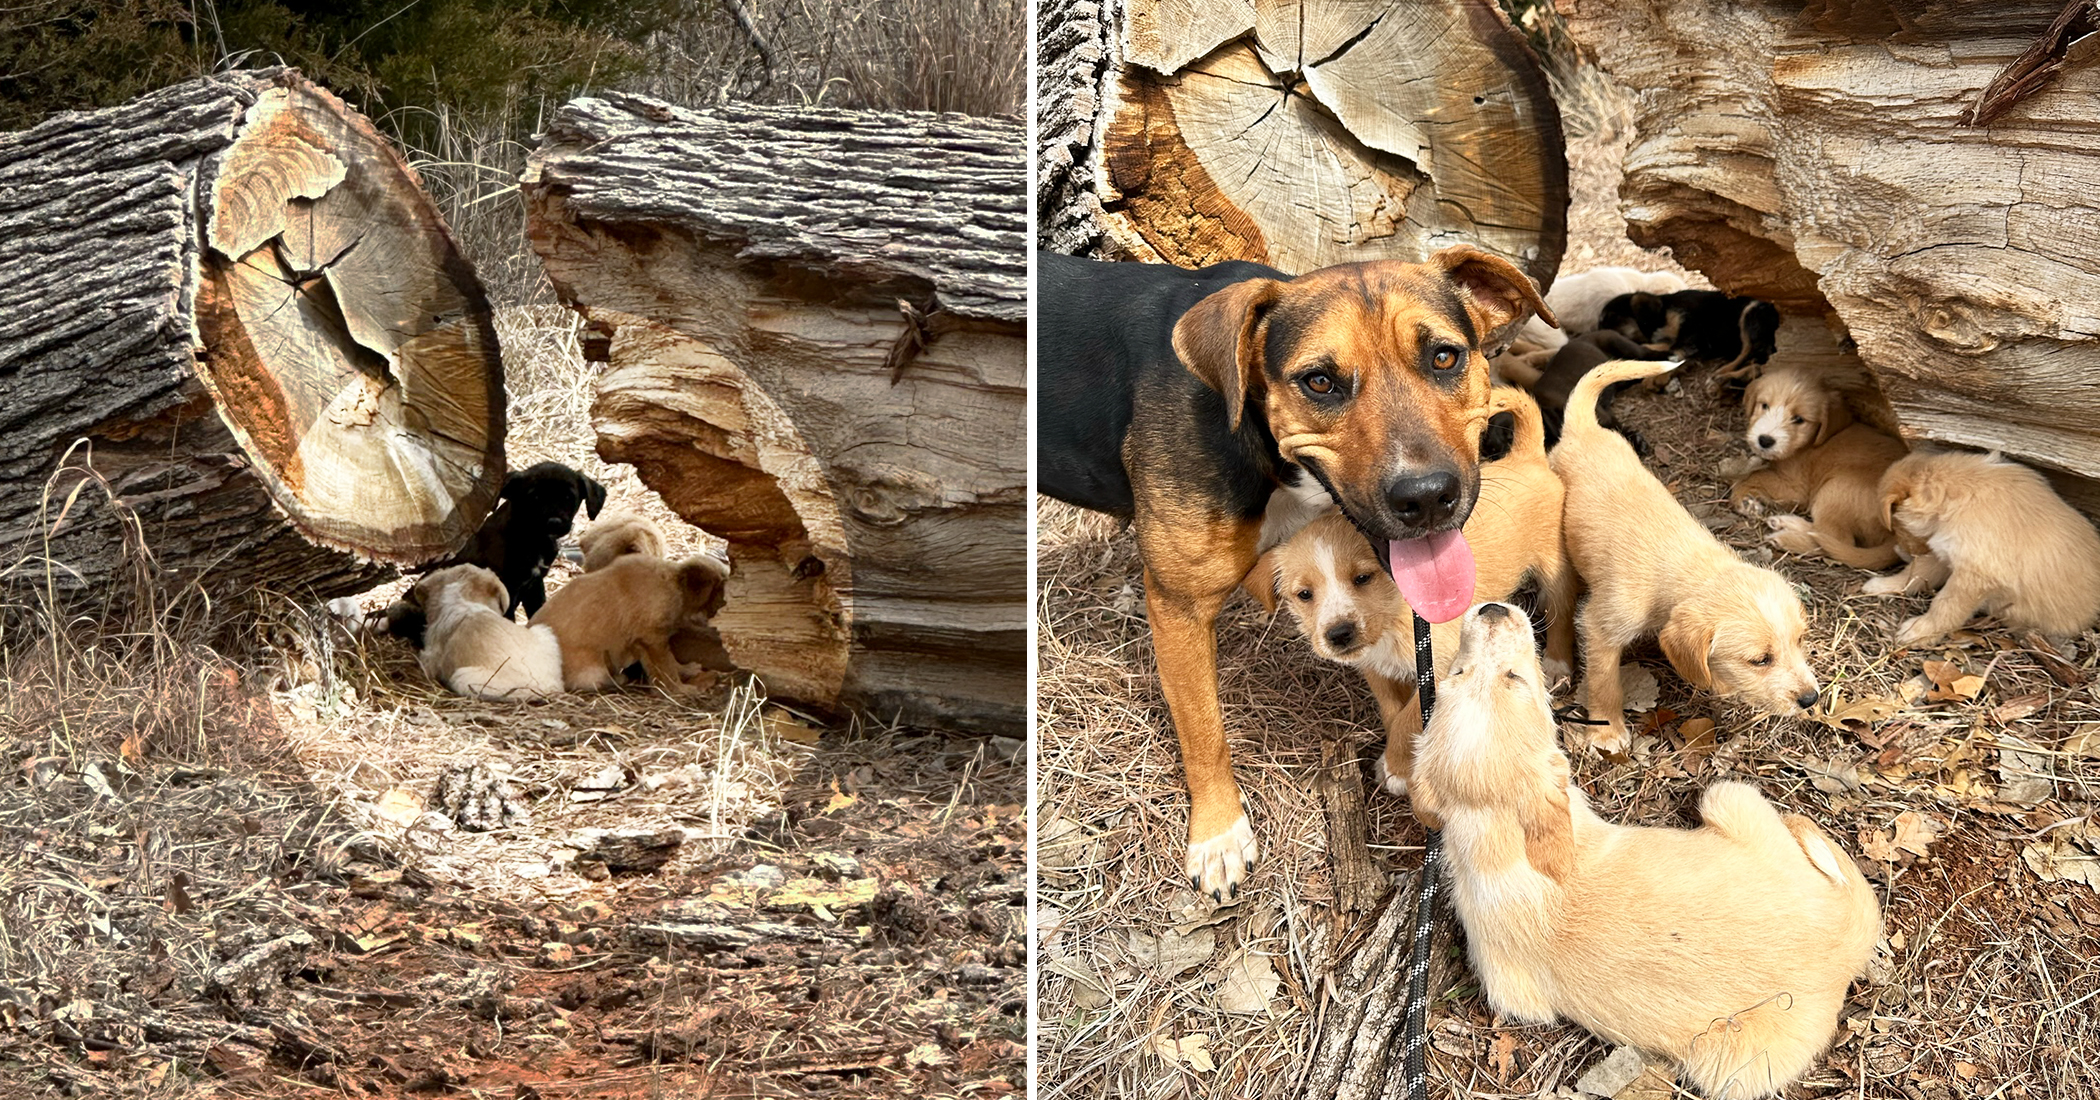 NextImg:Mama dog runs up to a woman in a parking lot and leads her to a fallen log with 16 puppies behind